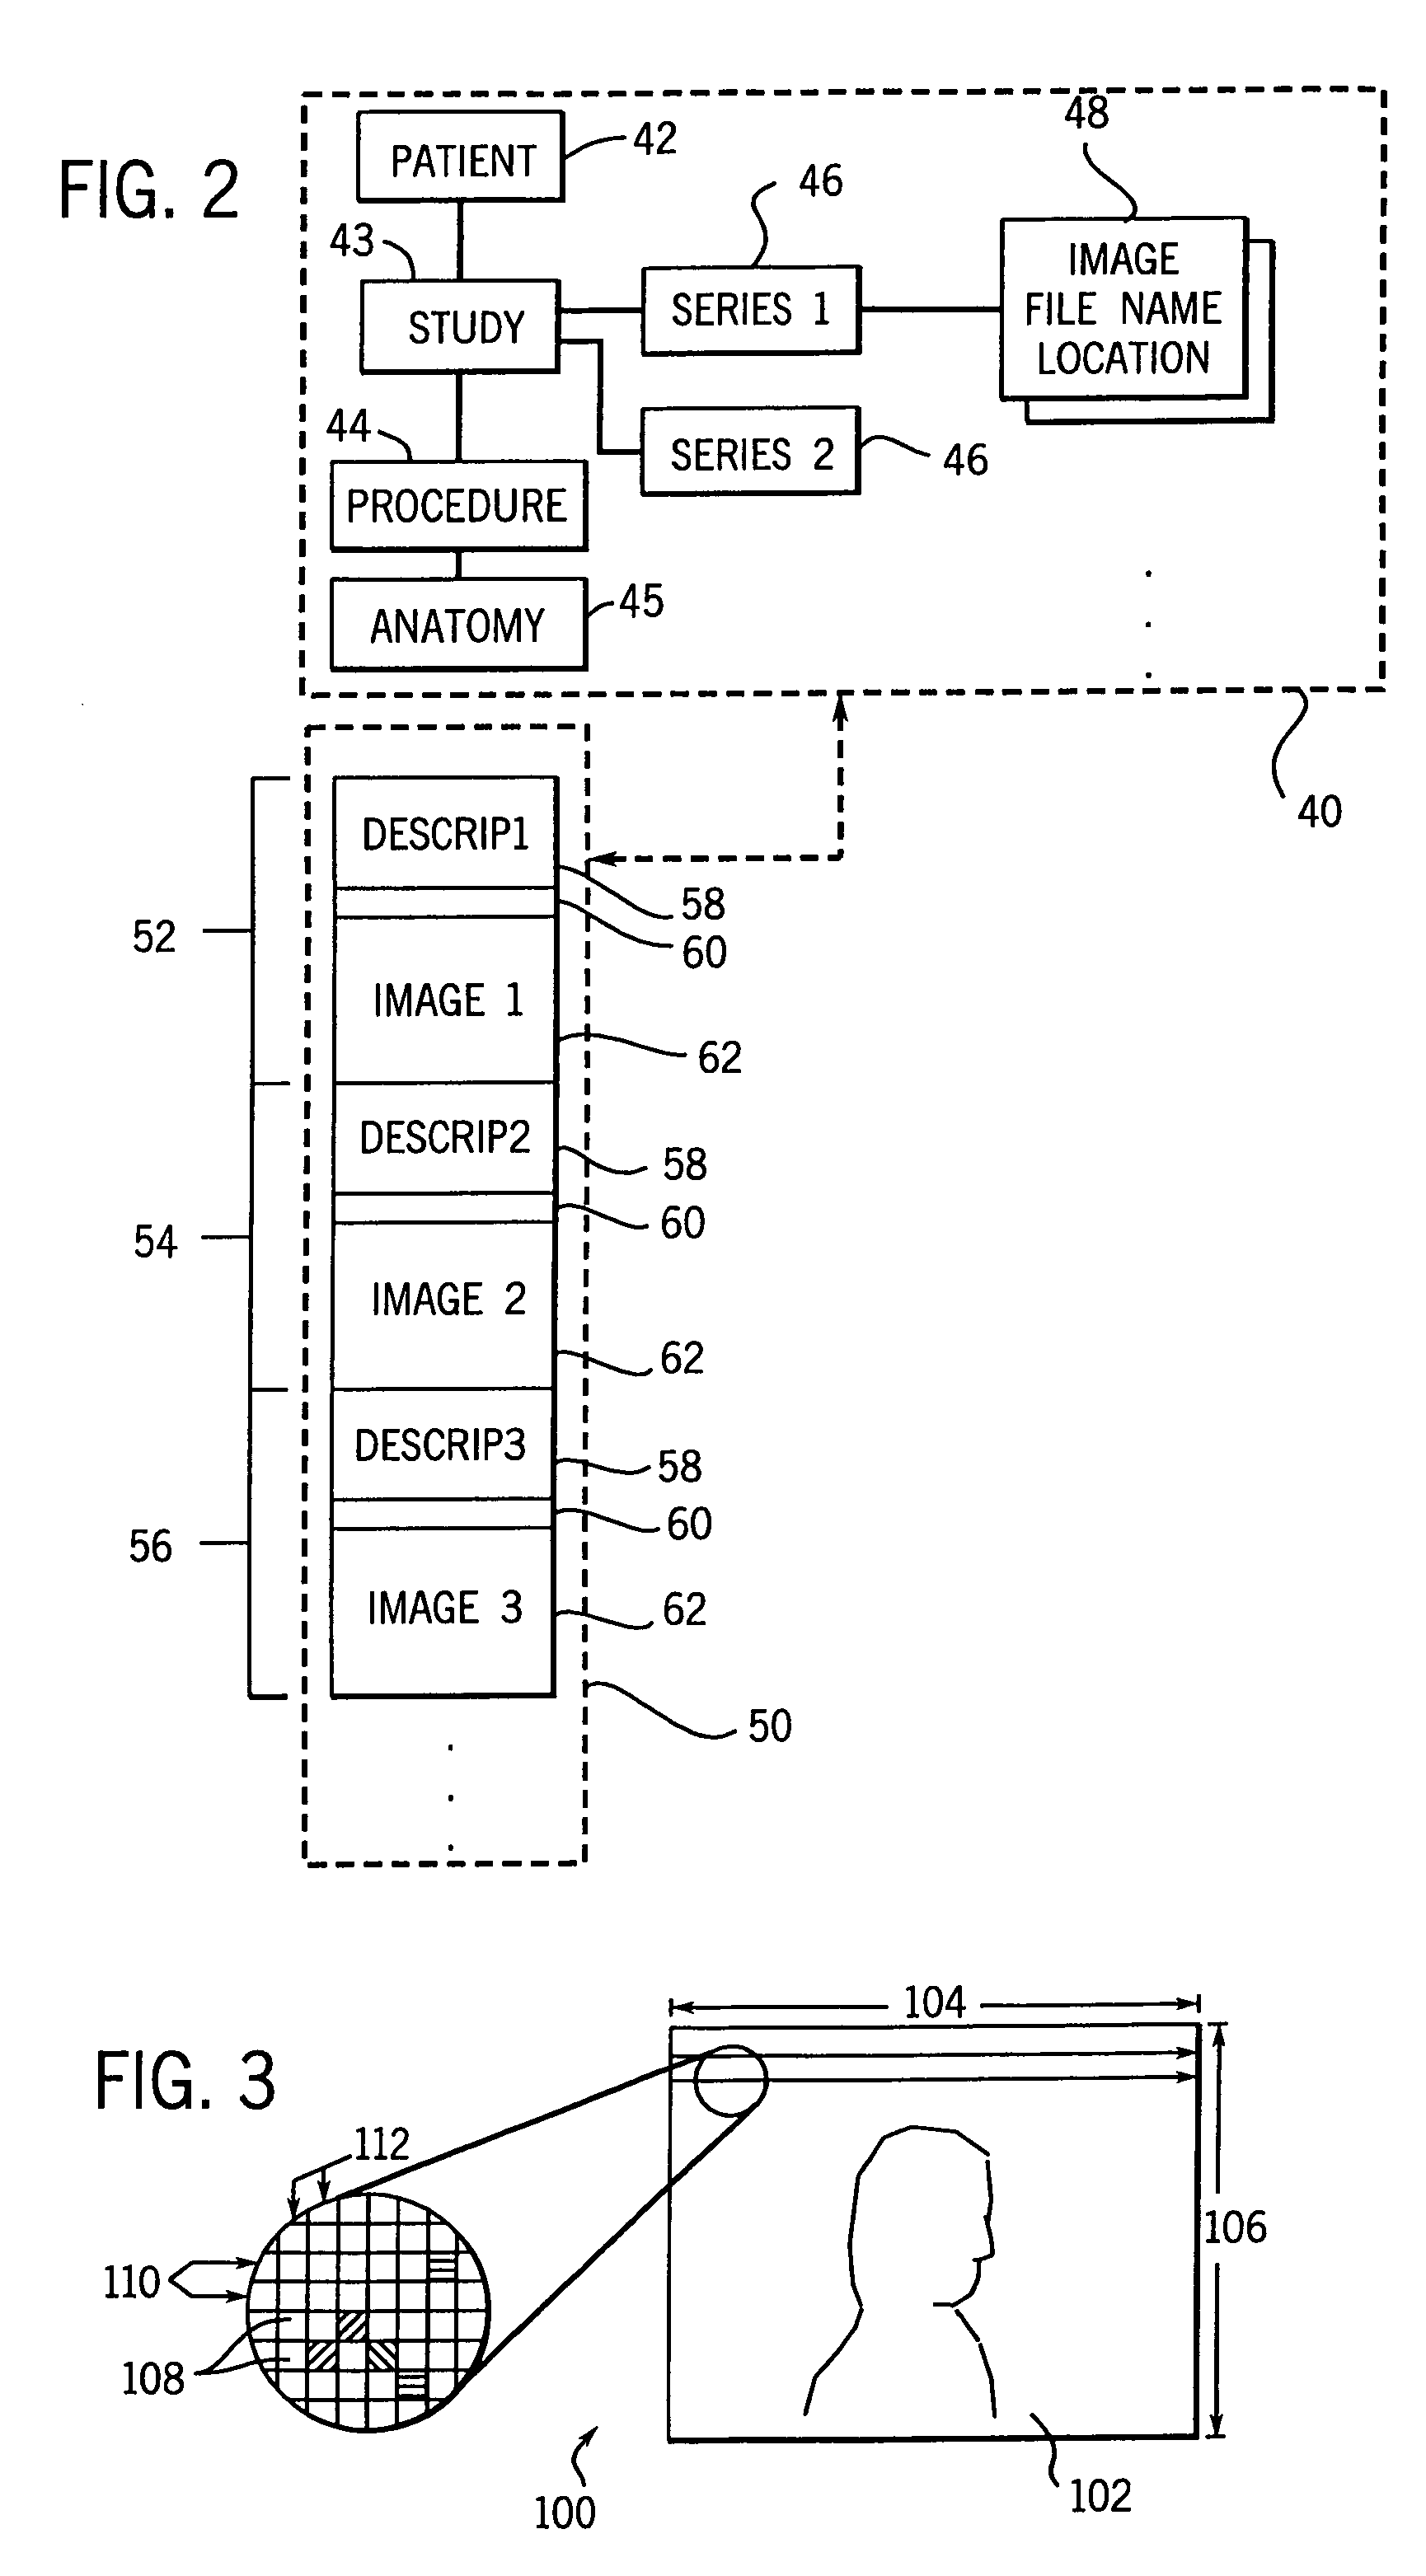 Image data compression employing multiple compression code tables